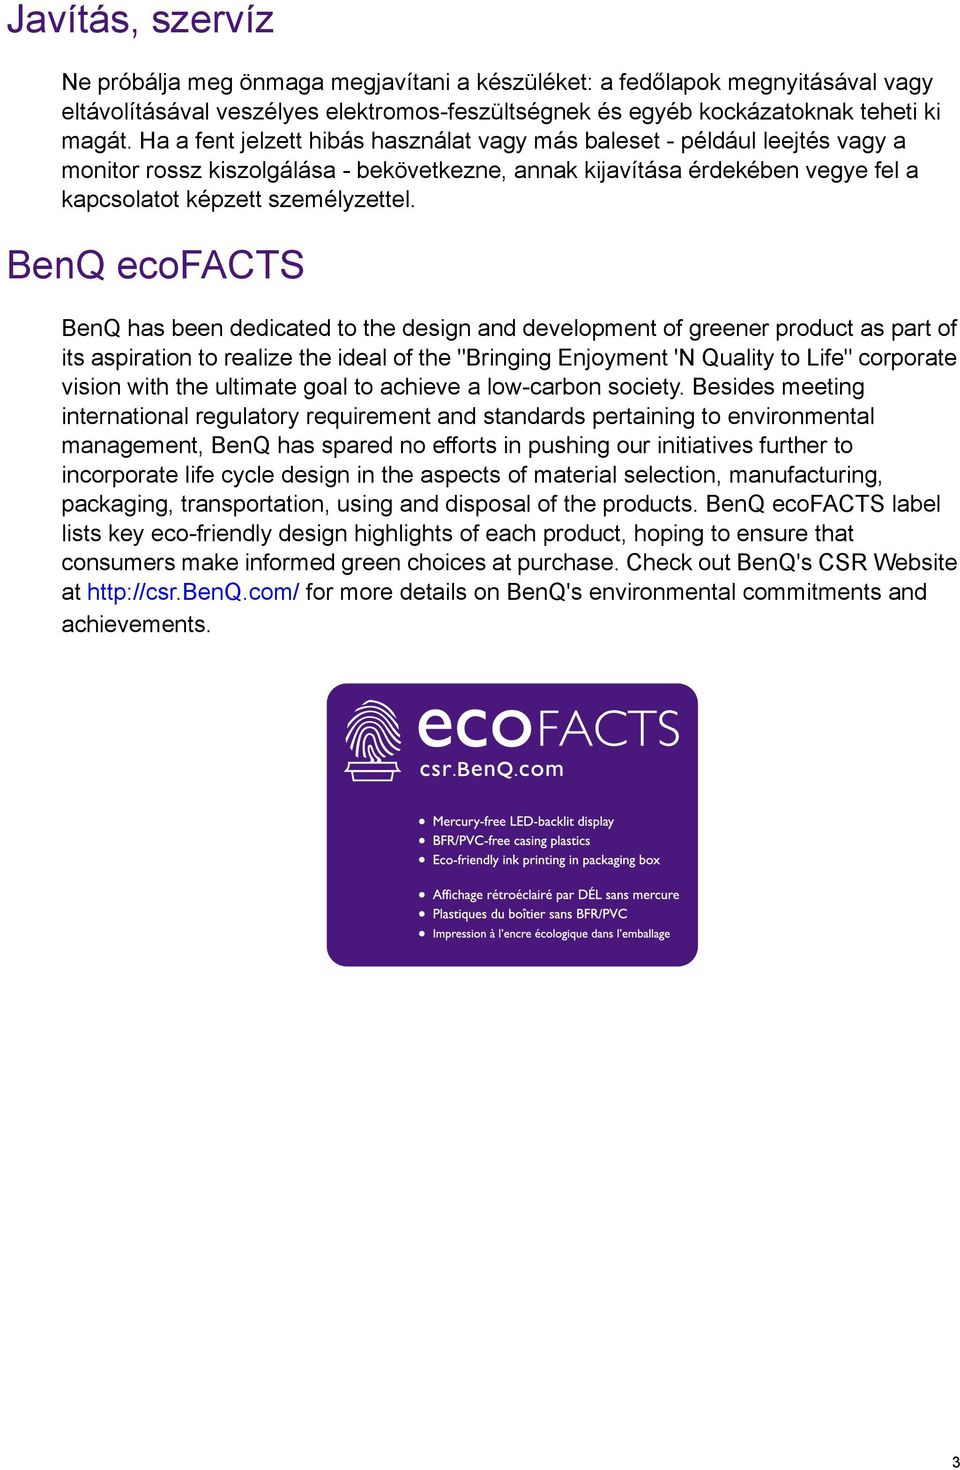 BenQ ecofacts BenQ has been dedicated to the design and development of greener product as part of its aspiration to realize the ideal of the "Bringing Enjoyment 'N Quality to Life" corporate vision